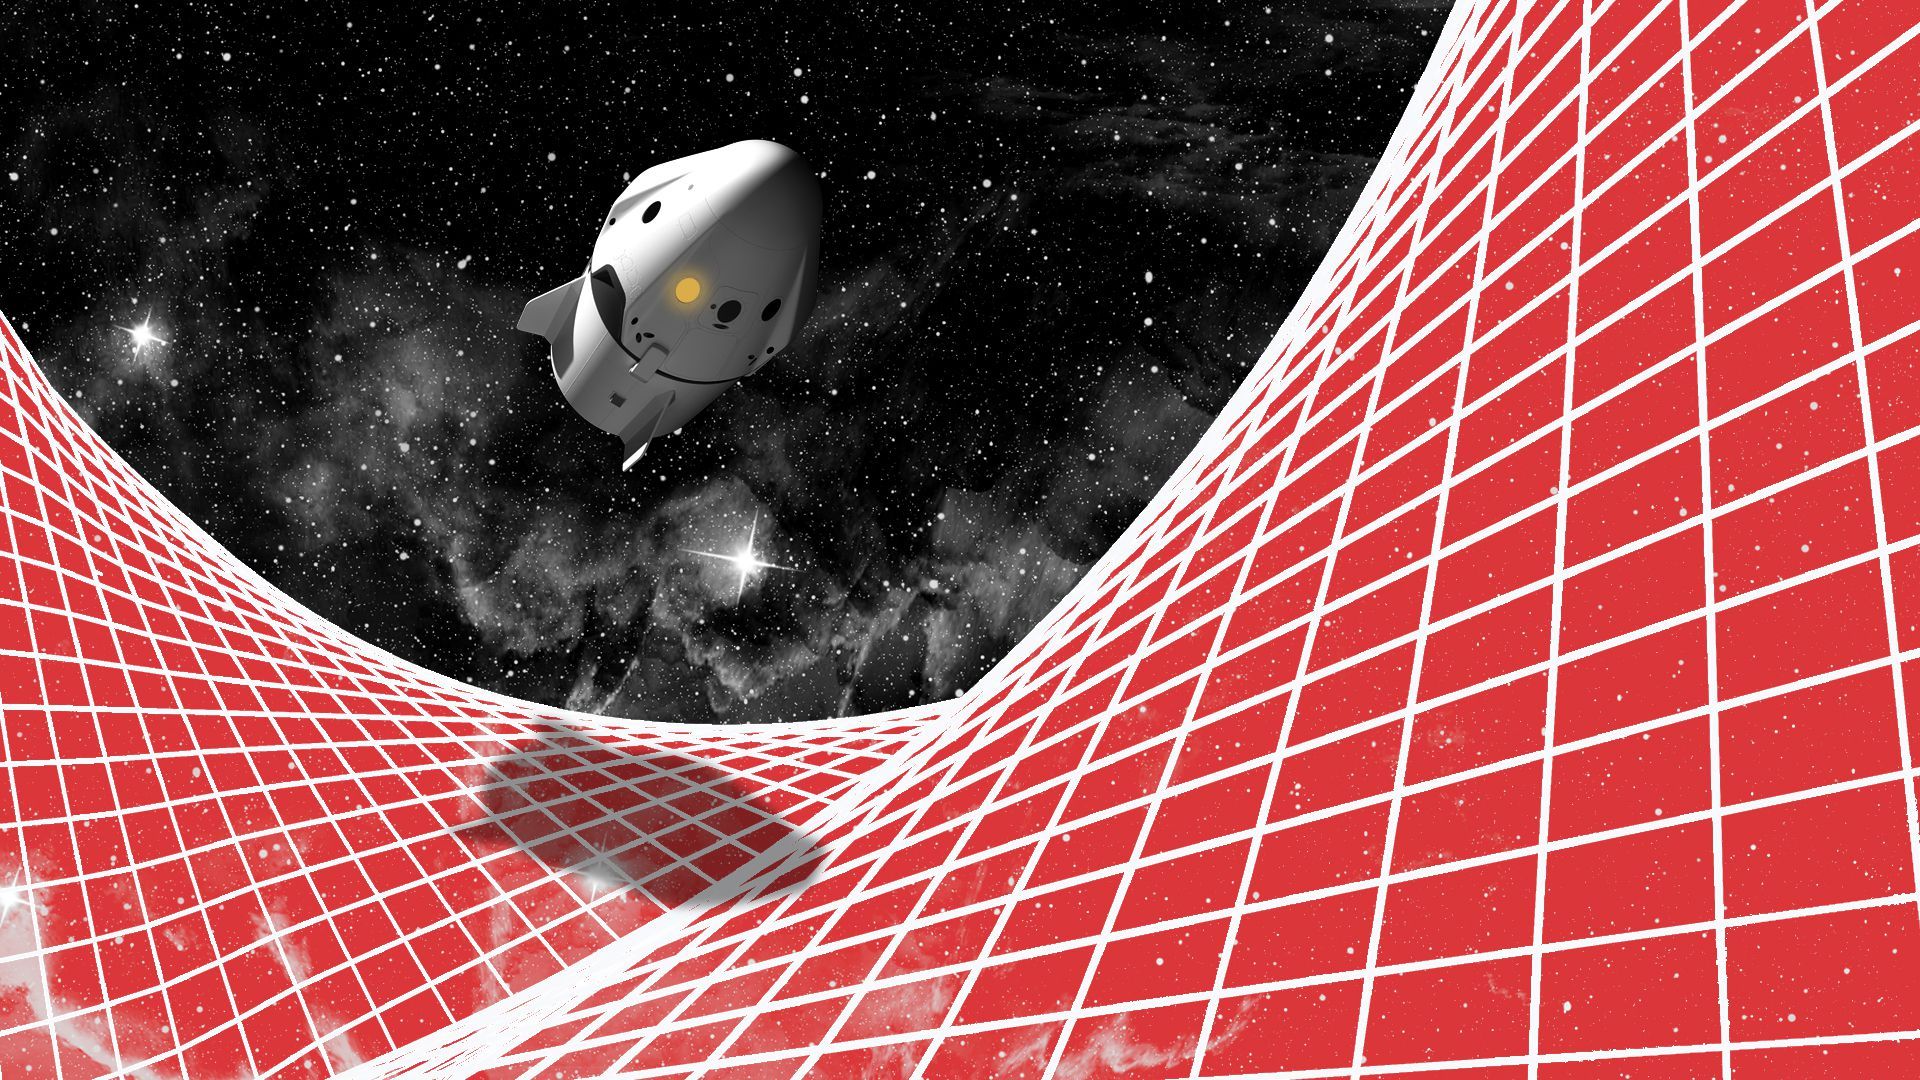 Illustration of a space ship in space with a curving grid beneath it